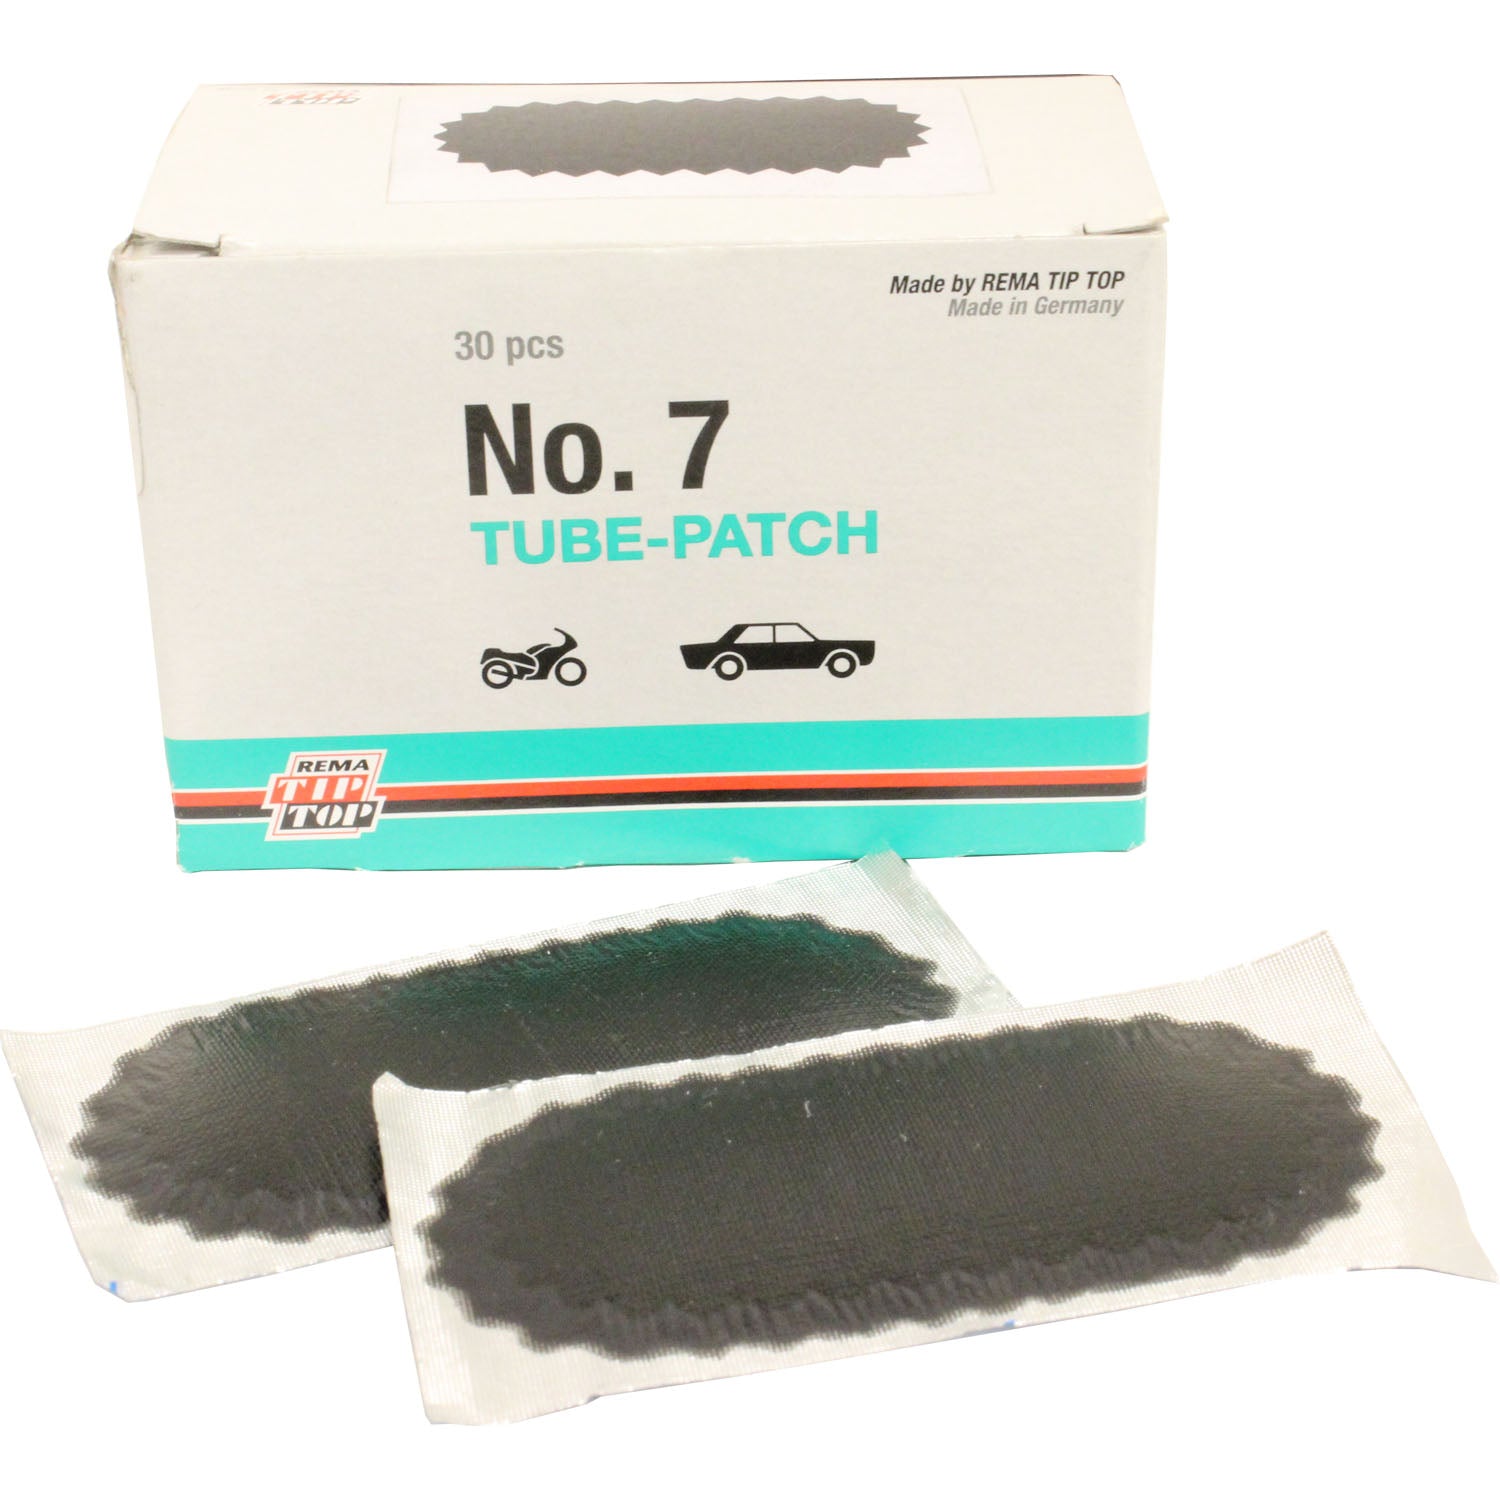 REMA TIP TOP 7 Oval Black Tube Patch 3" x 1-1/2" - Box of 30